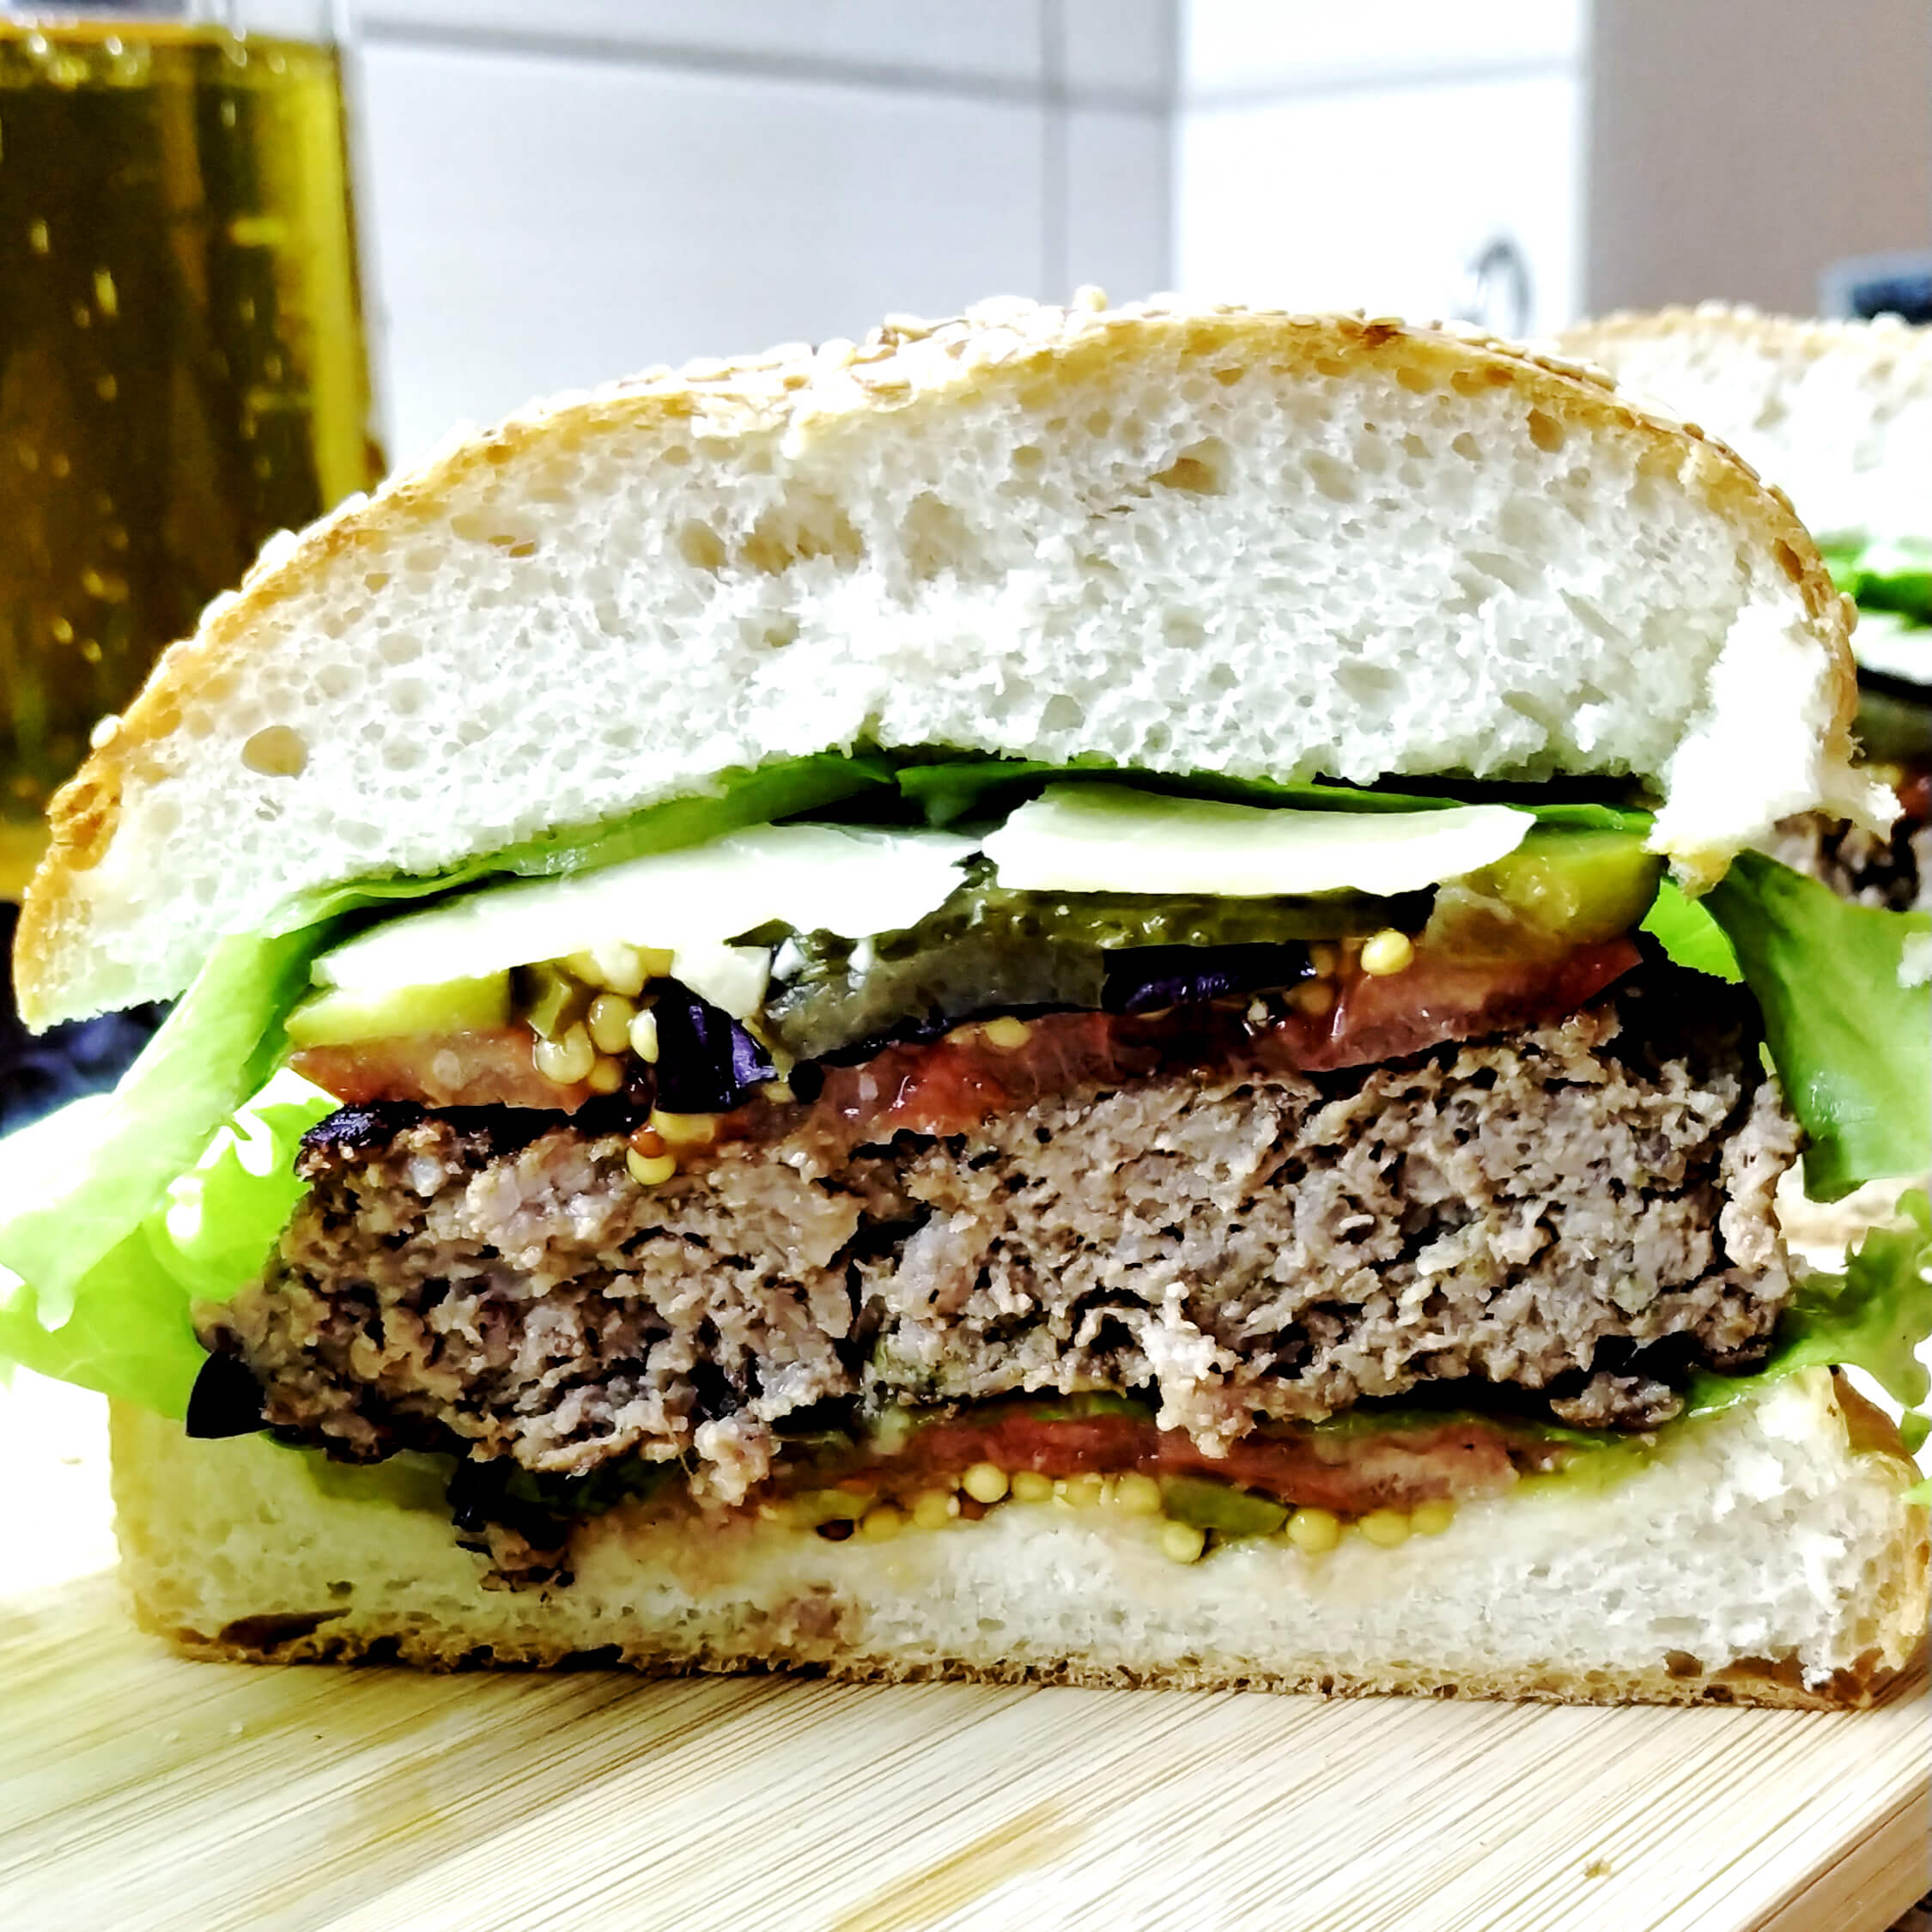 Beef burger with pickles and Dijon mustard